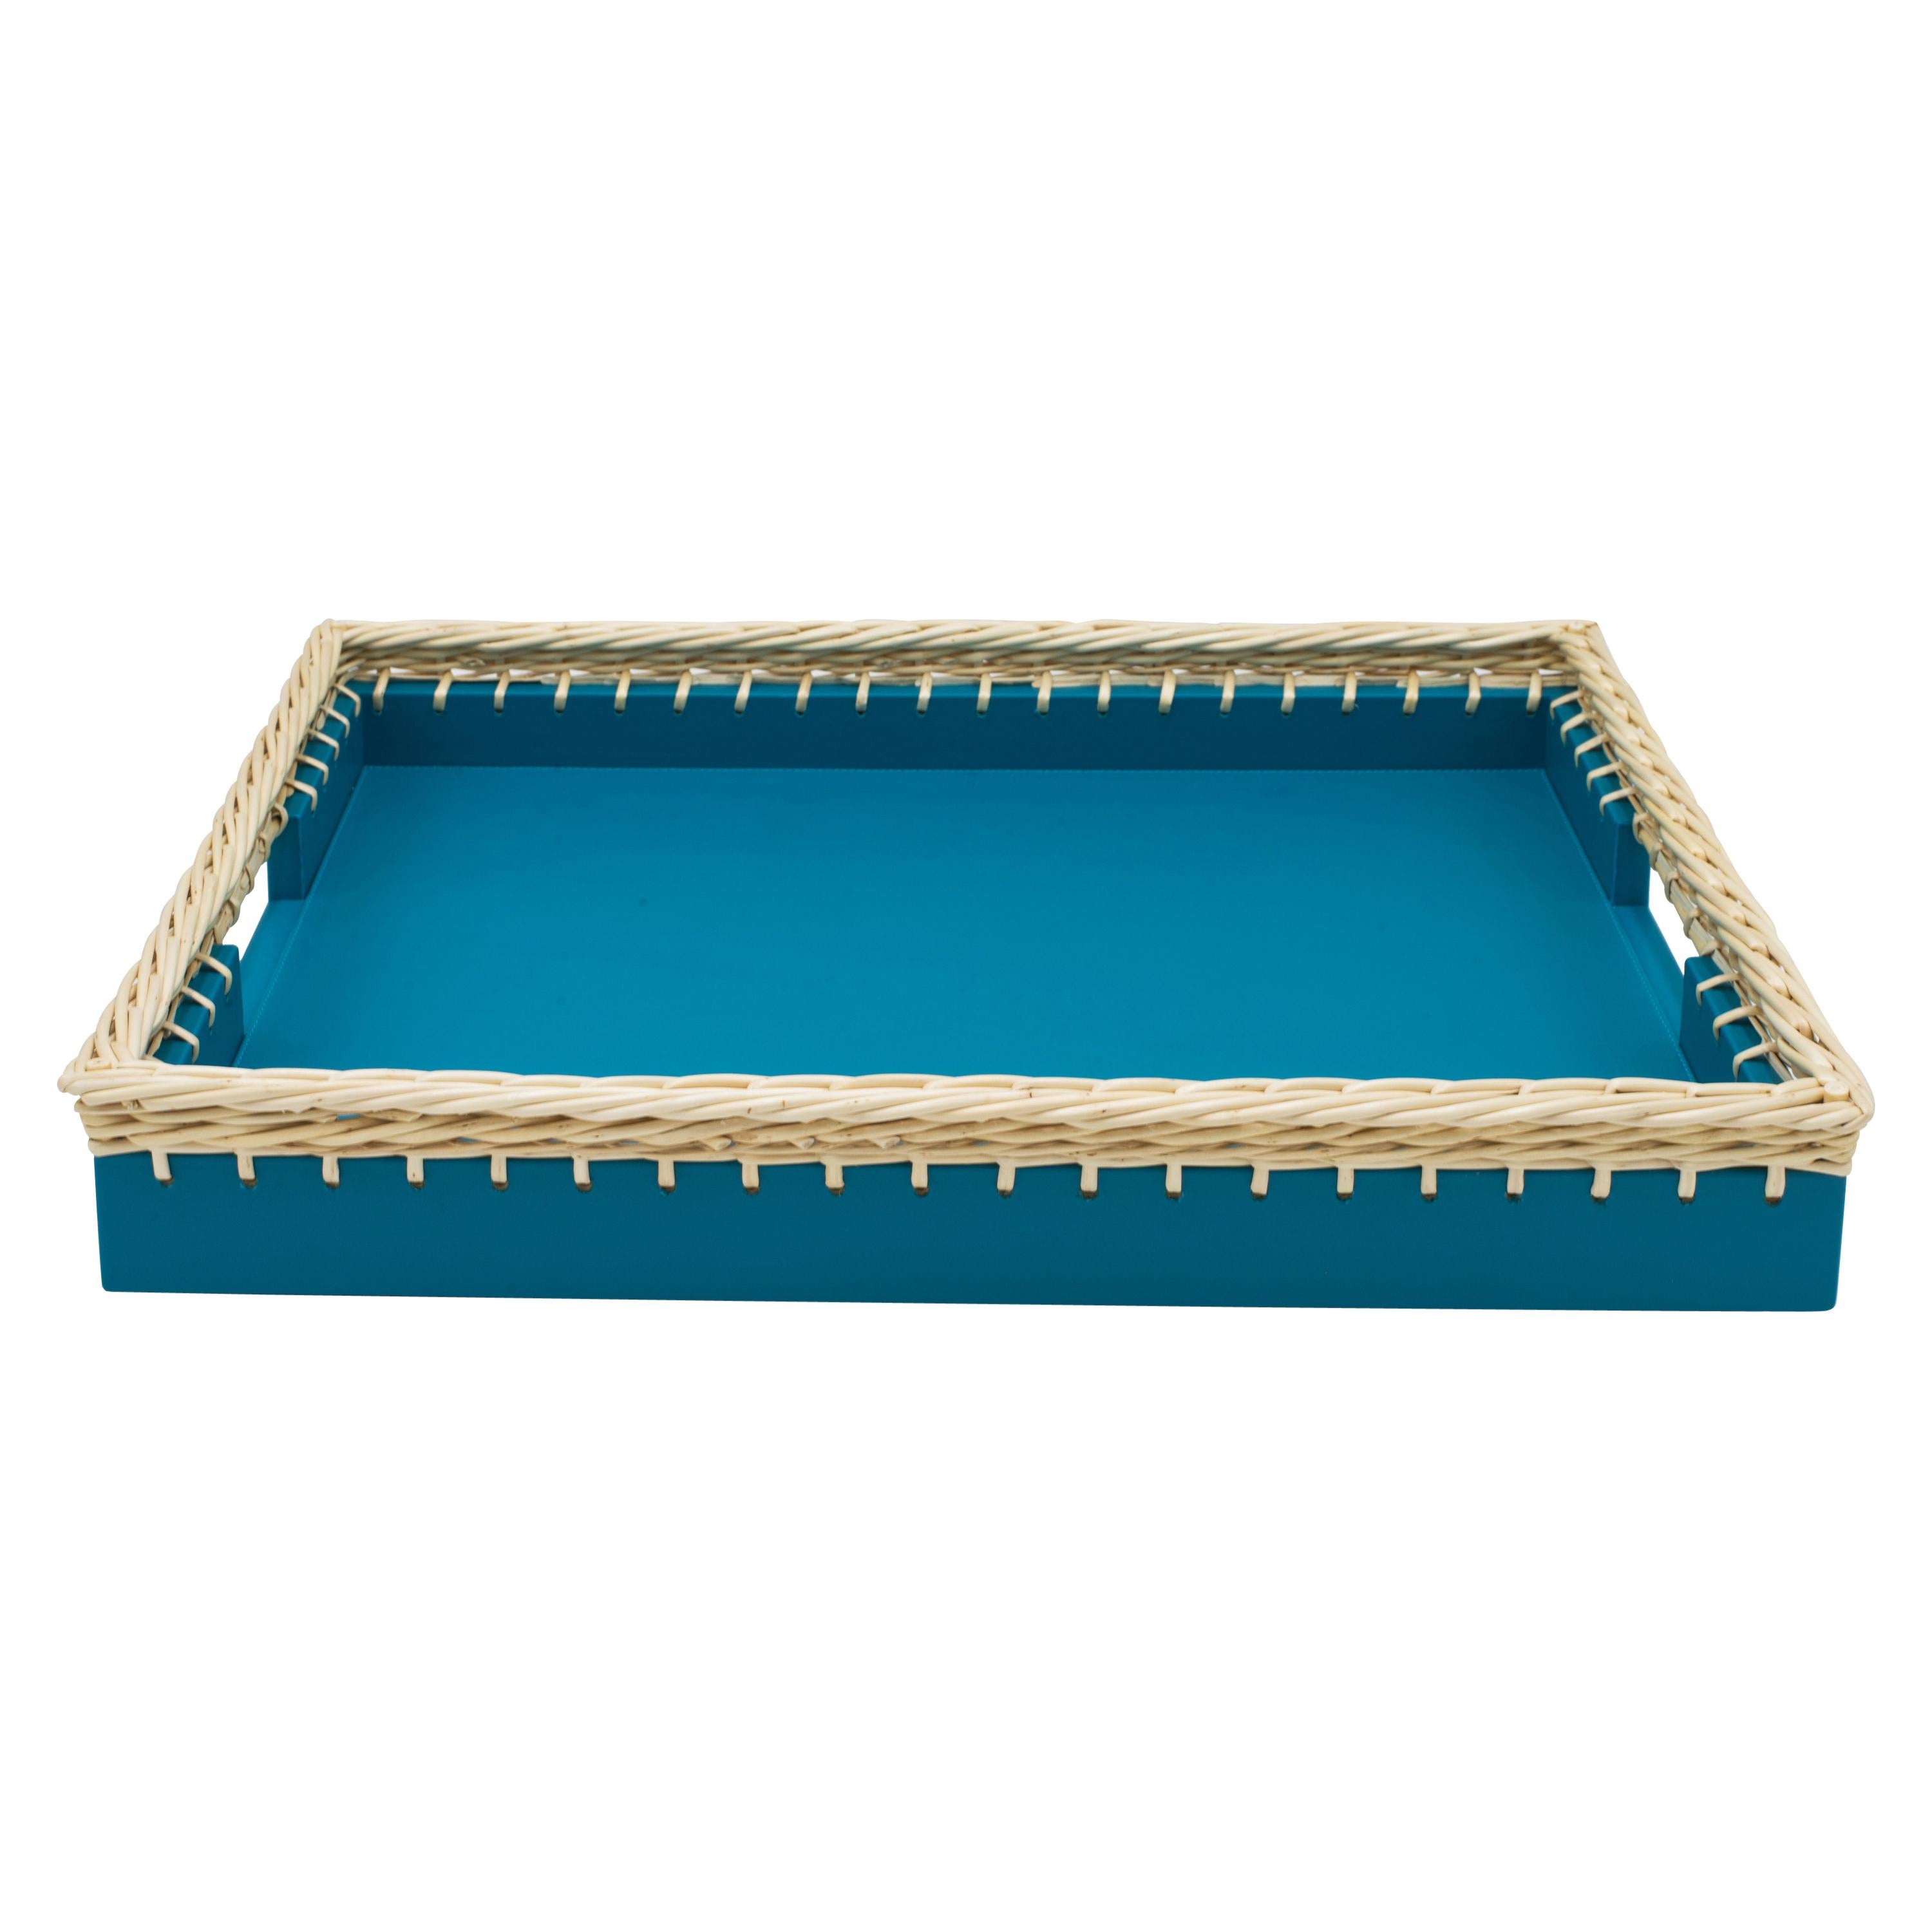 Contemporary Italian Blue Leather and Wicker Tray For Sale